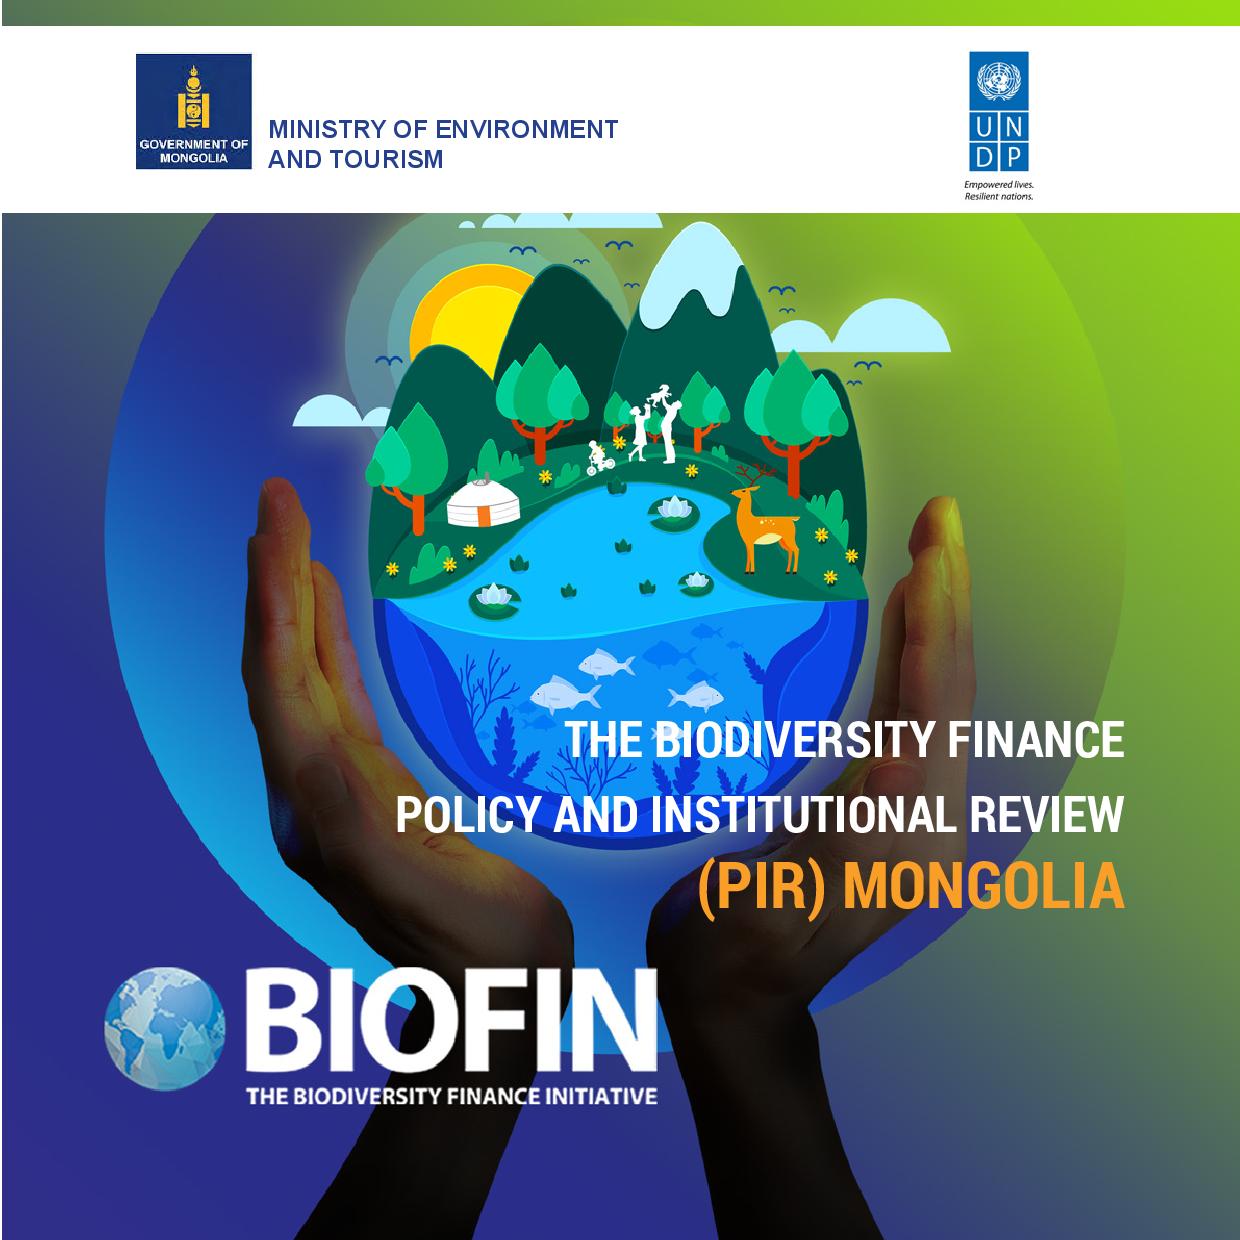 Mongolia: Biodiversity Finance Policy and Institutional Review (PIR)